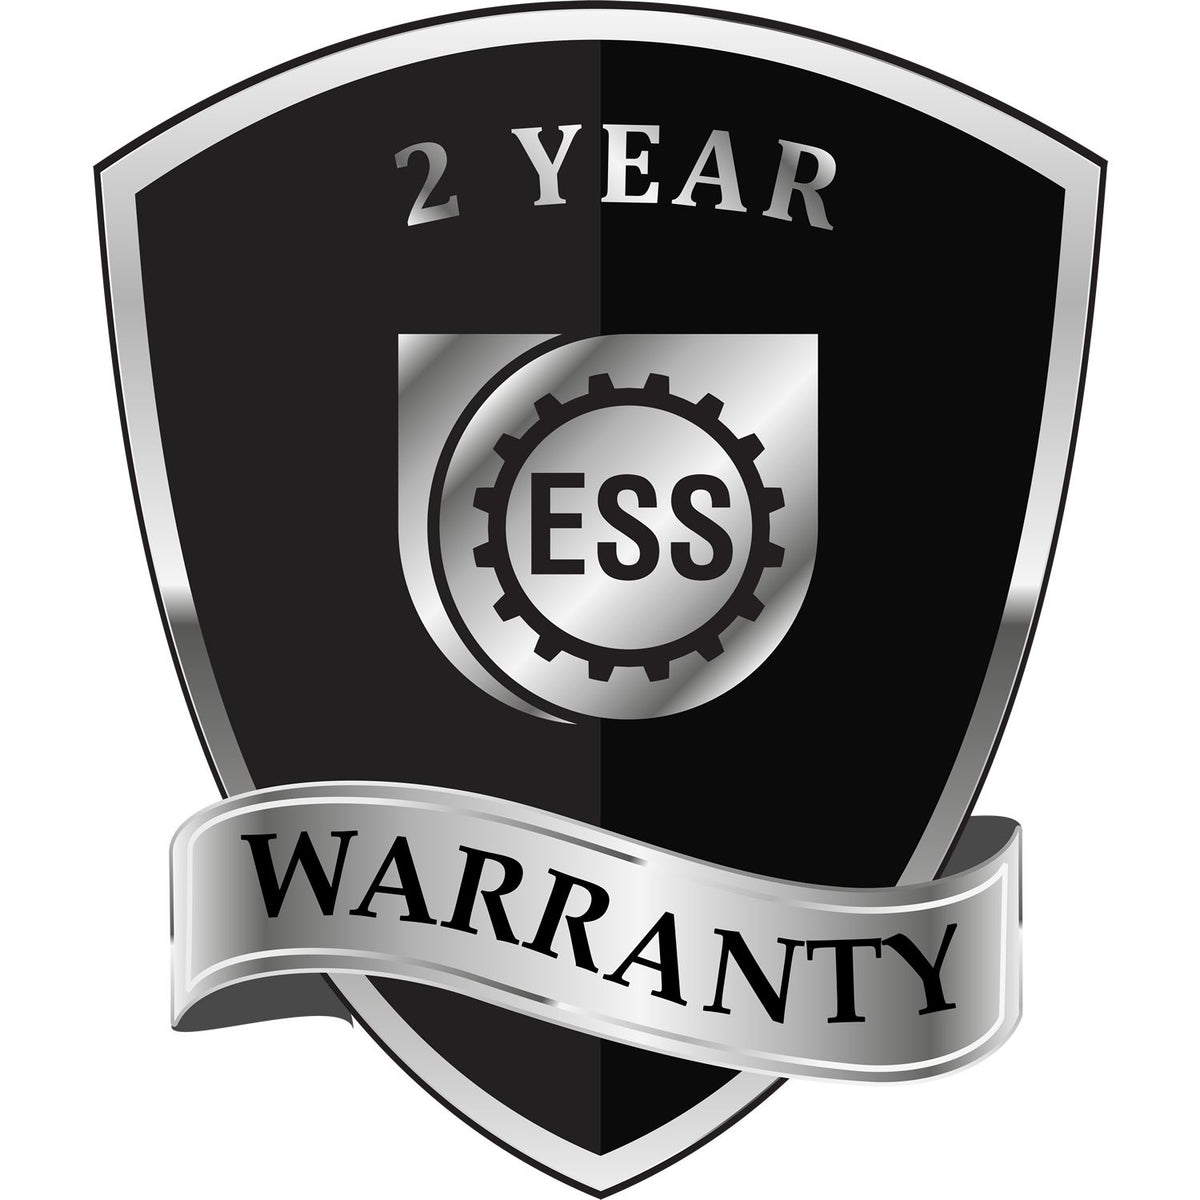 A black and silver badge or emblem showing warranty information for the State of Alaska Extended Long Reach Geologist Seal